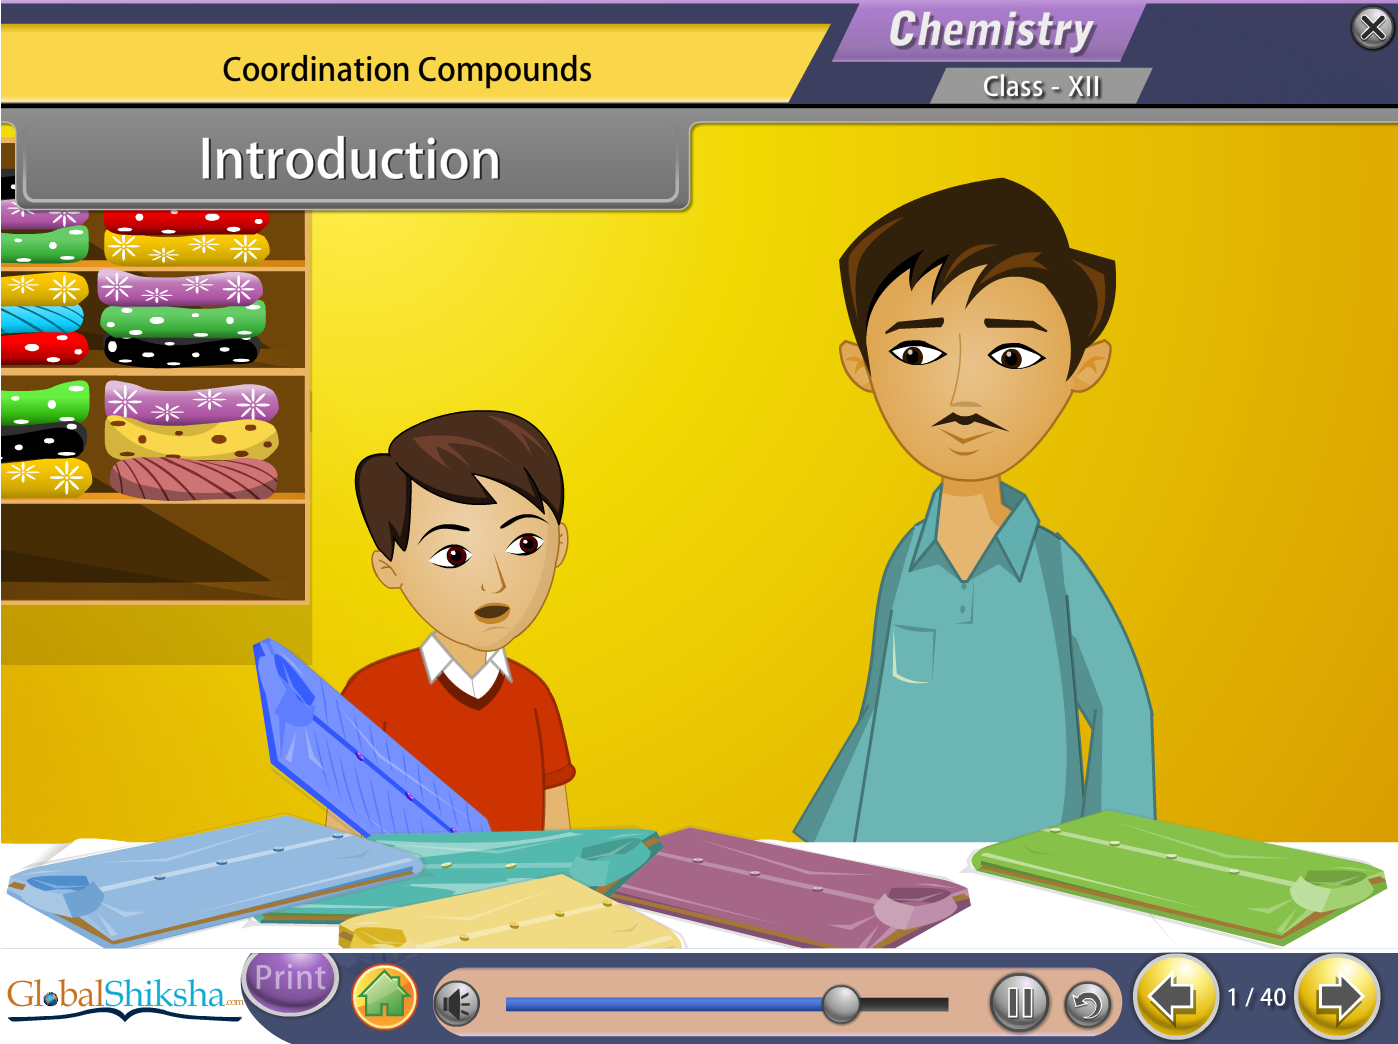 Tamil Nadu State Board Class 12 PCMB [Physics, Chemistry, Maths & Biology] Animated Pendrive in English